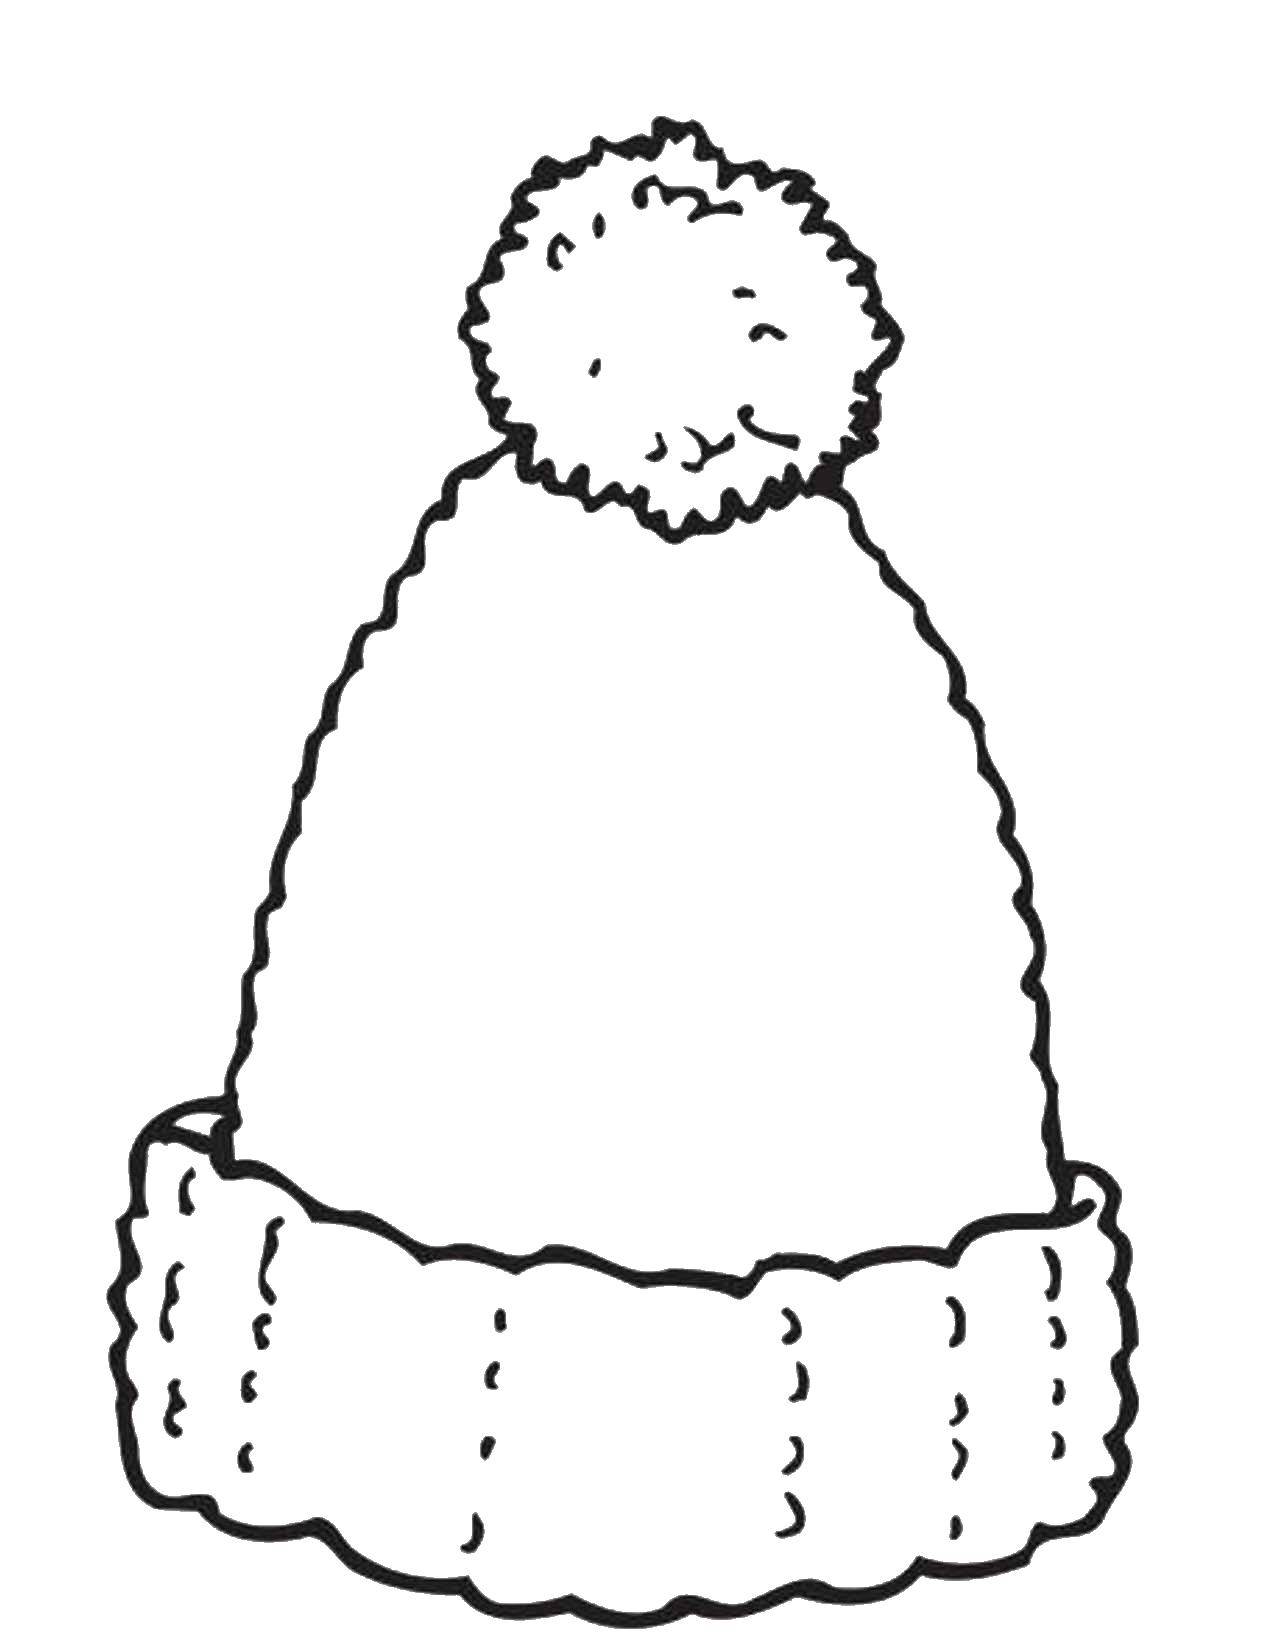 Coloring Hat. Category clothing. Tags:  garment, hat, headdress.